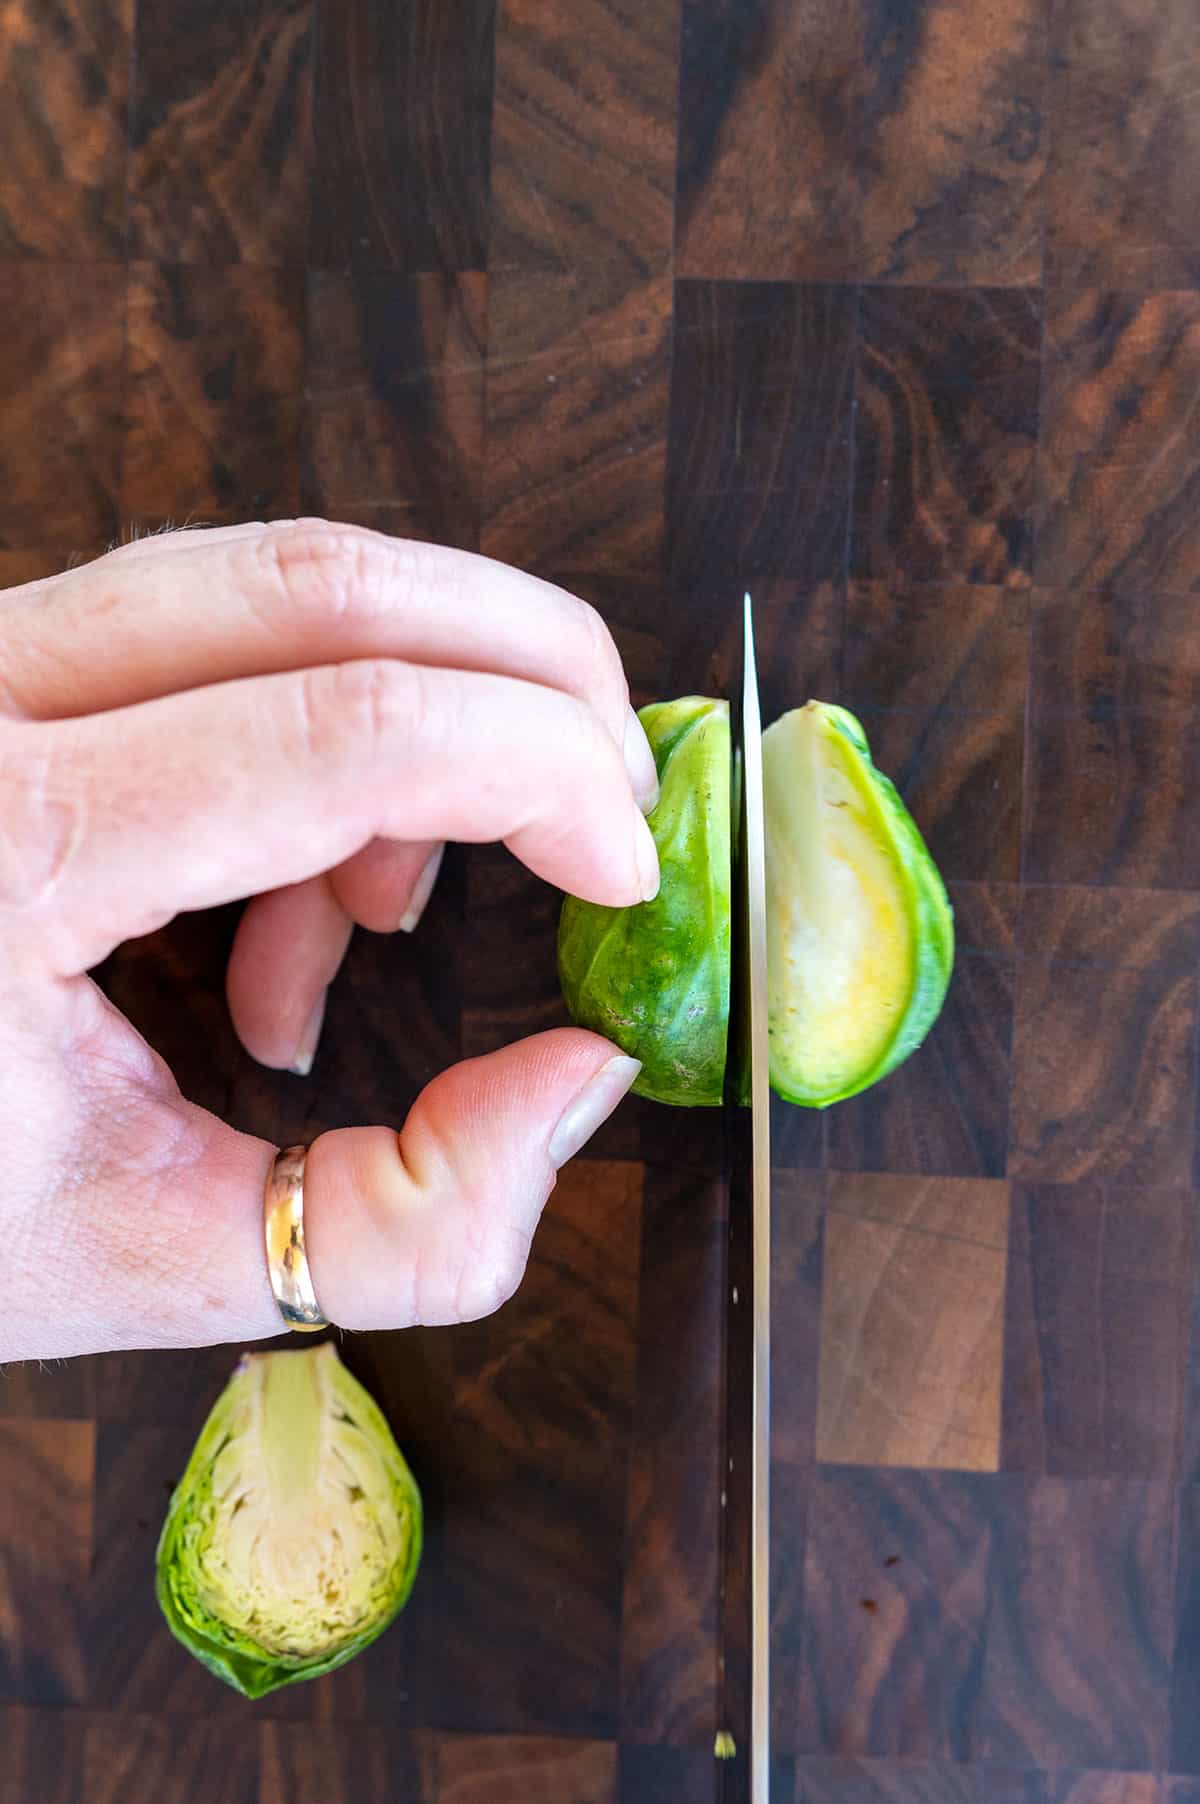 knife slicing brussels sprouts in half.